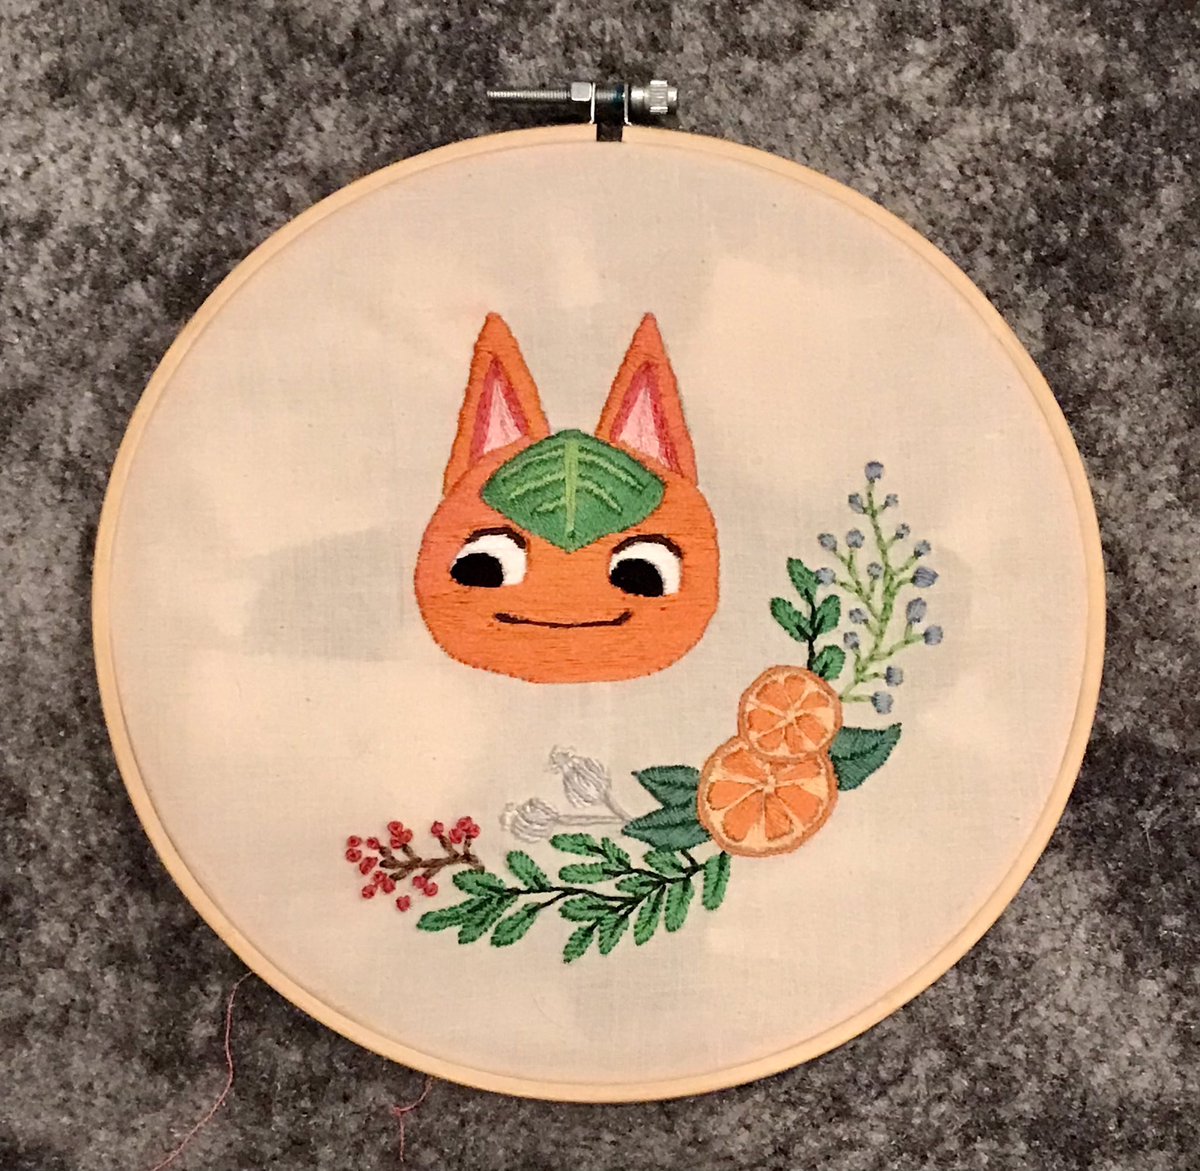 I needed a break from my needlepainting embroidery project so I ended up finishing her just now 🥺 sloppy in some areas, but still pretty cute I’d say 
#ACNH #AnimalCrossing